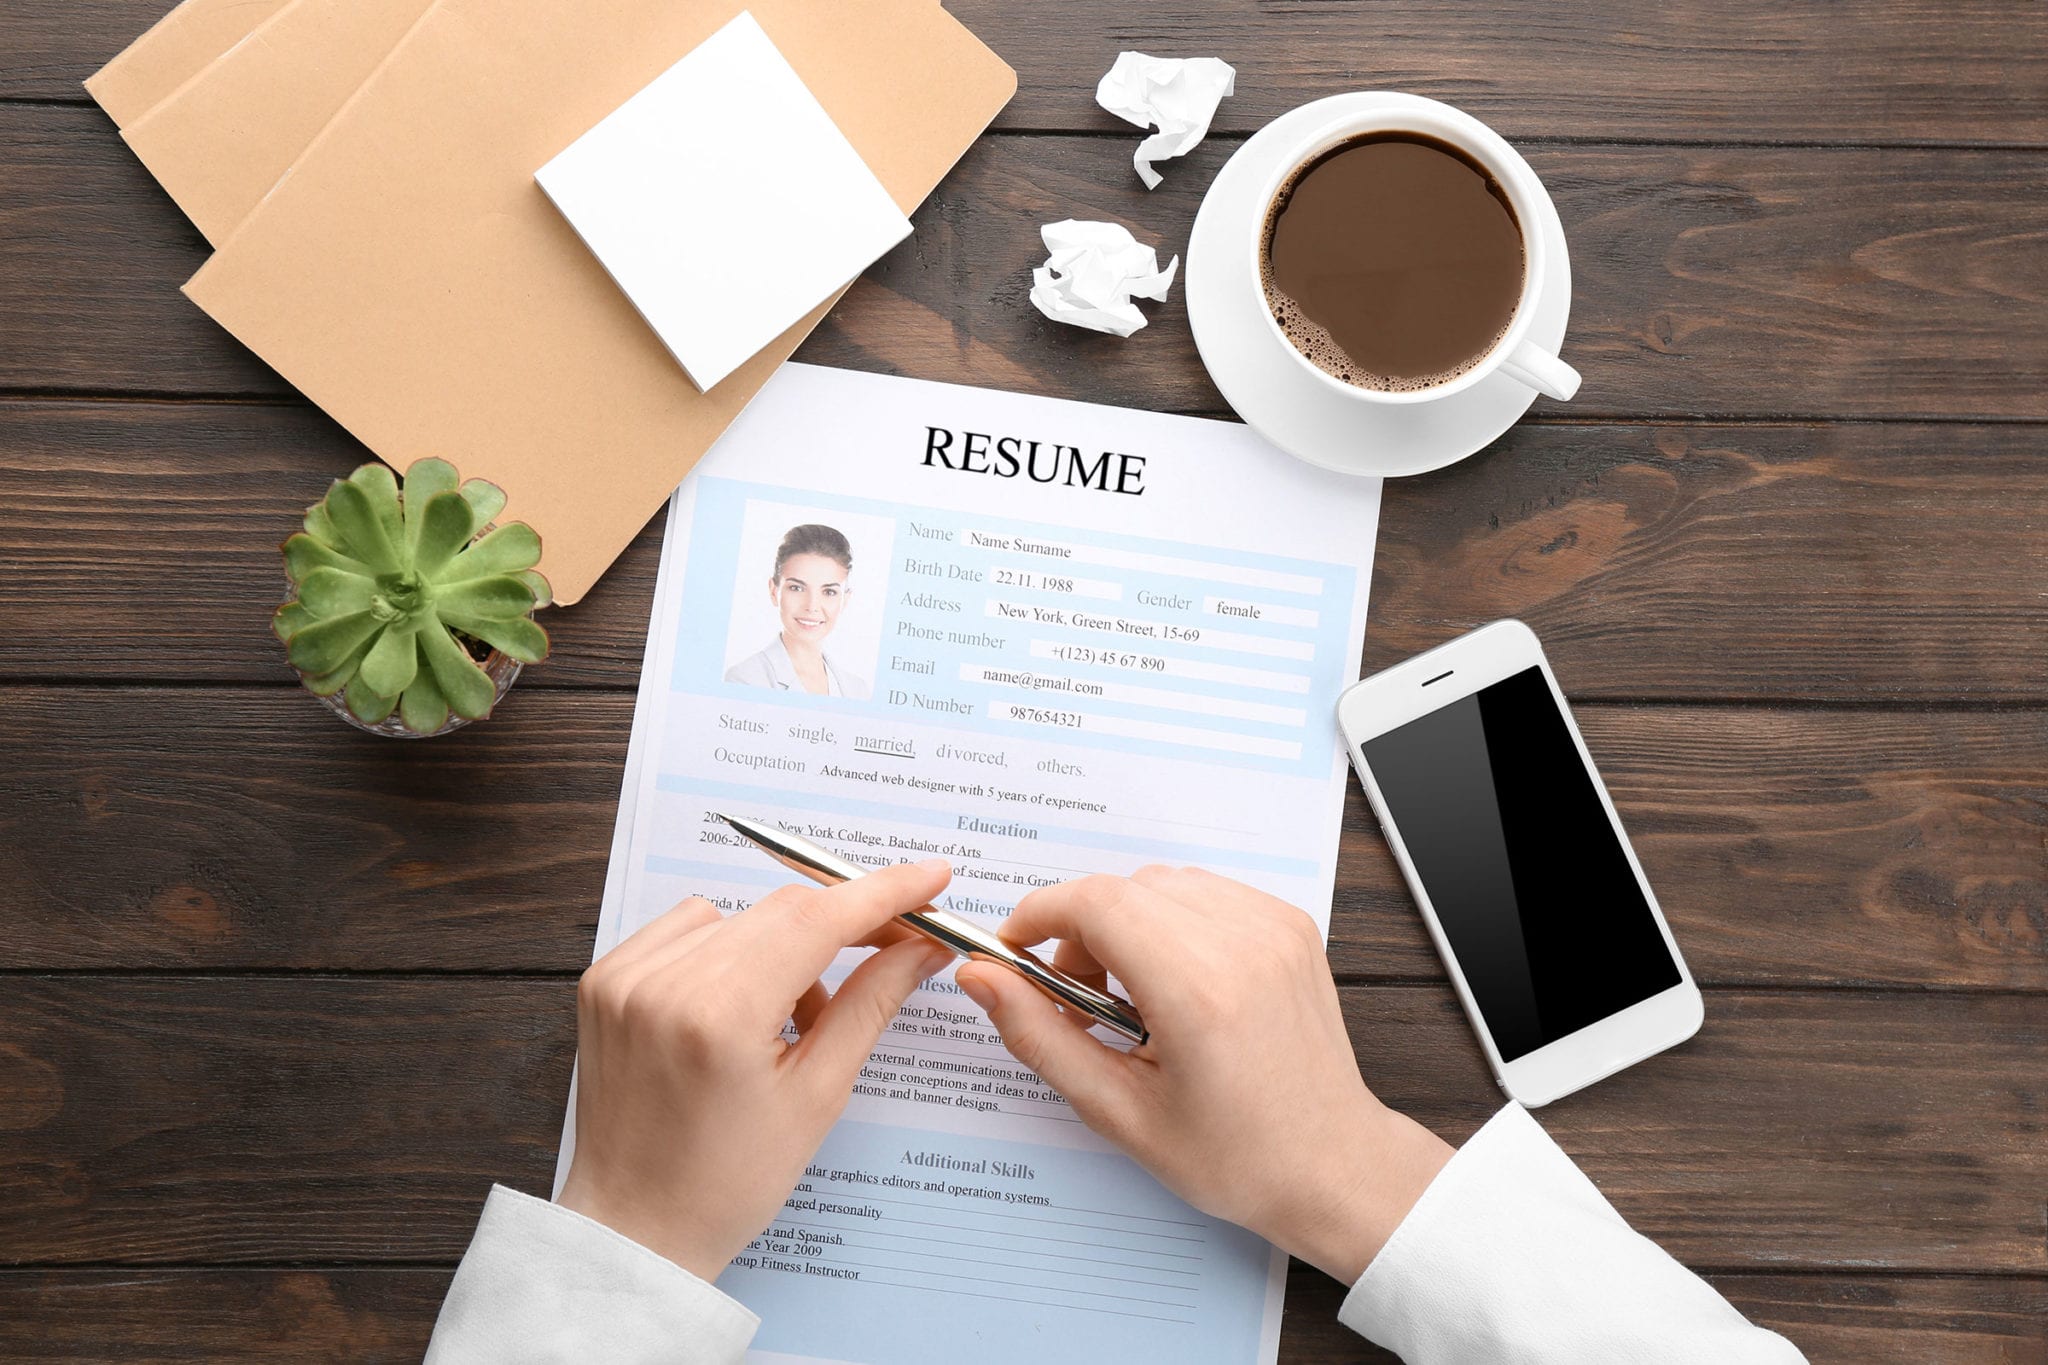 How to Write a Winning Work at Home Job Resume